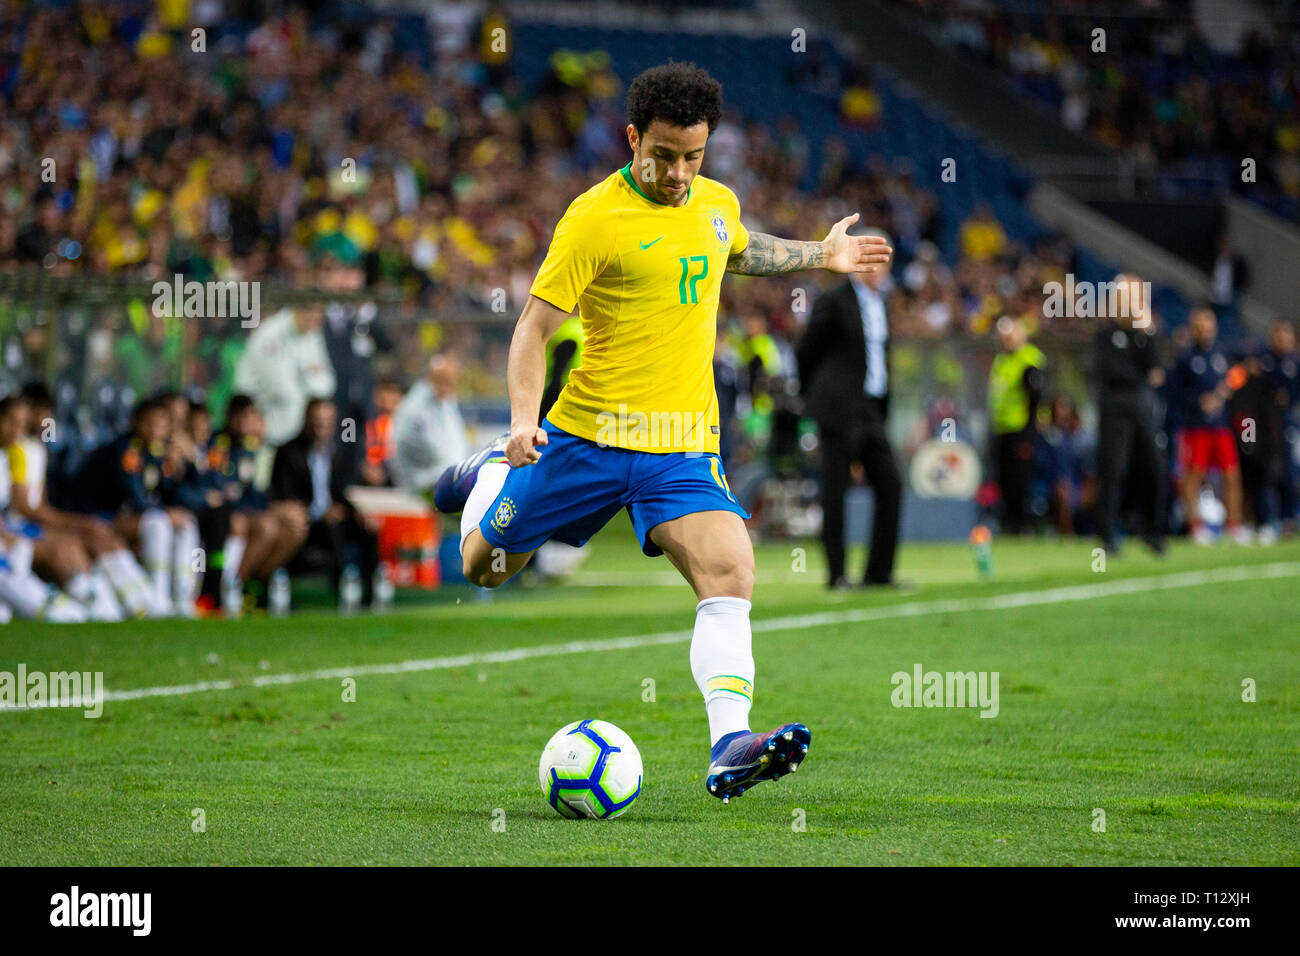 Brasil player Felipe A. Gomes seen in action during the friendly football match between Brazil and Panama for the Brazil Global Tour at Dragon Stadium in Porto. ( Final score; Brazil 1:1 Panama ) Stock Photo